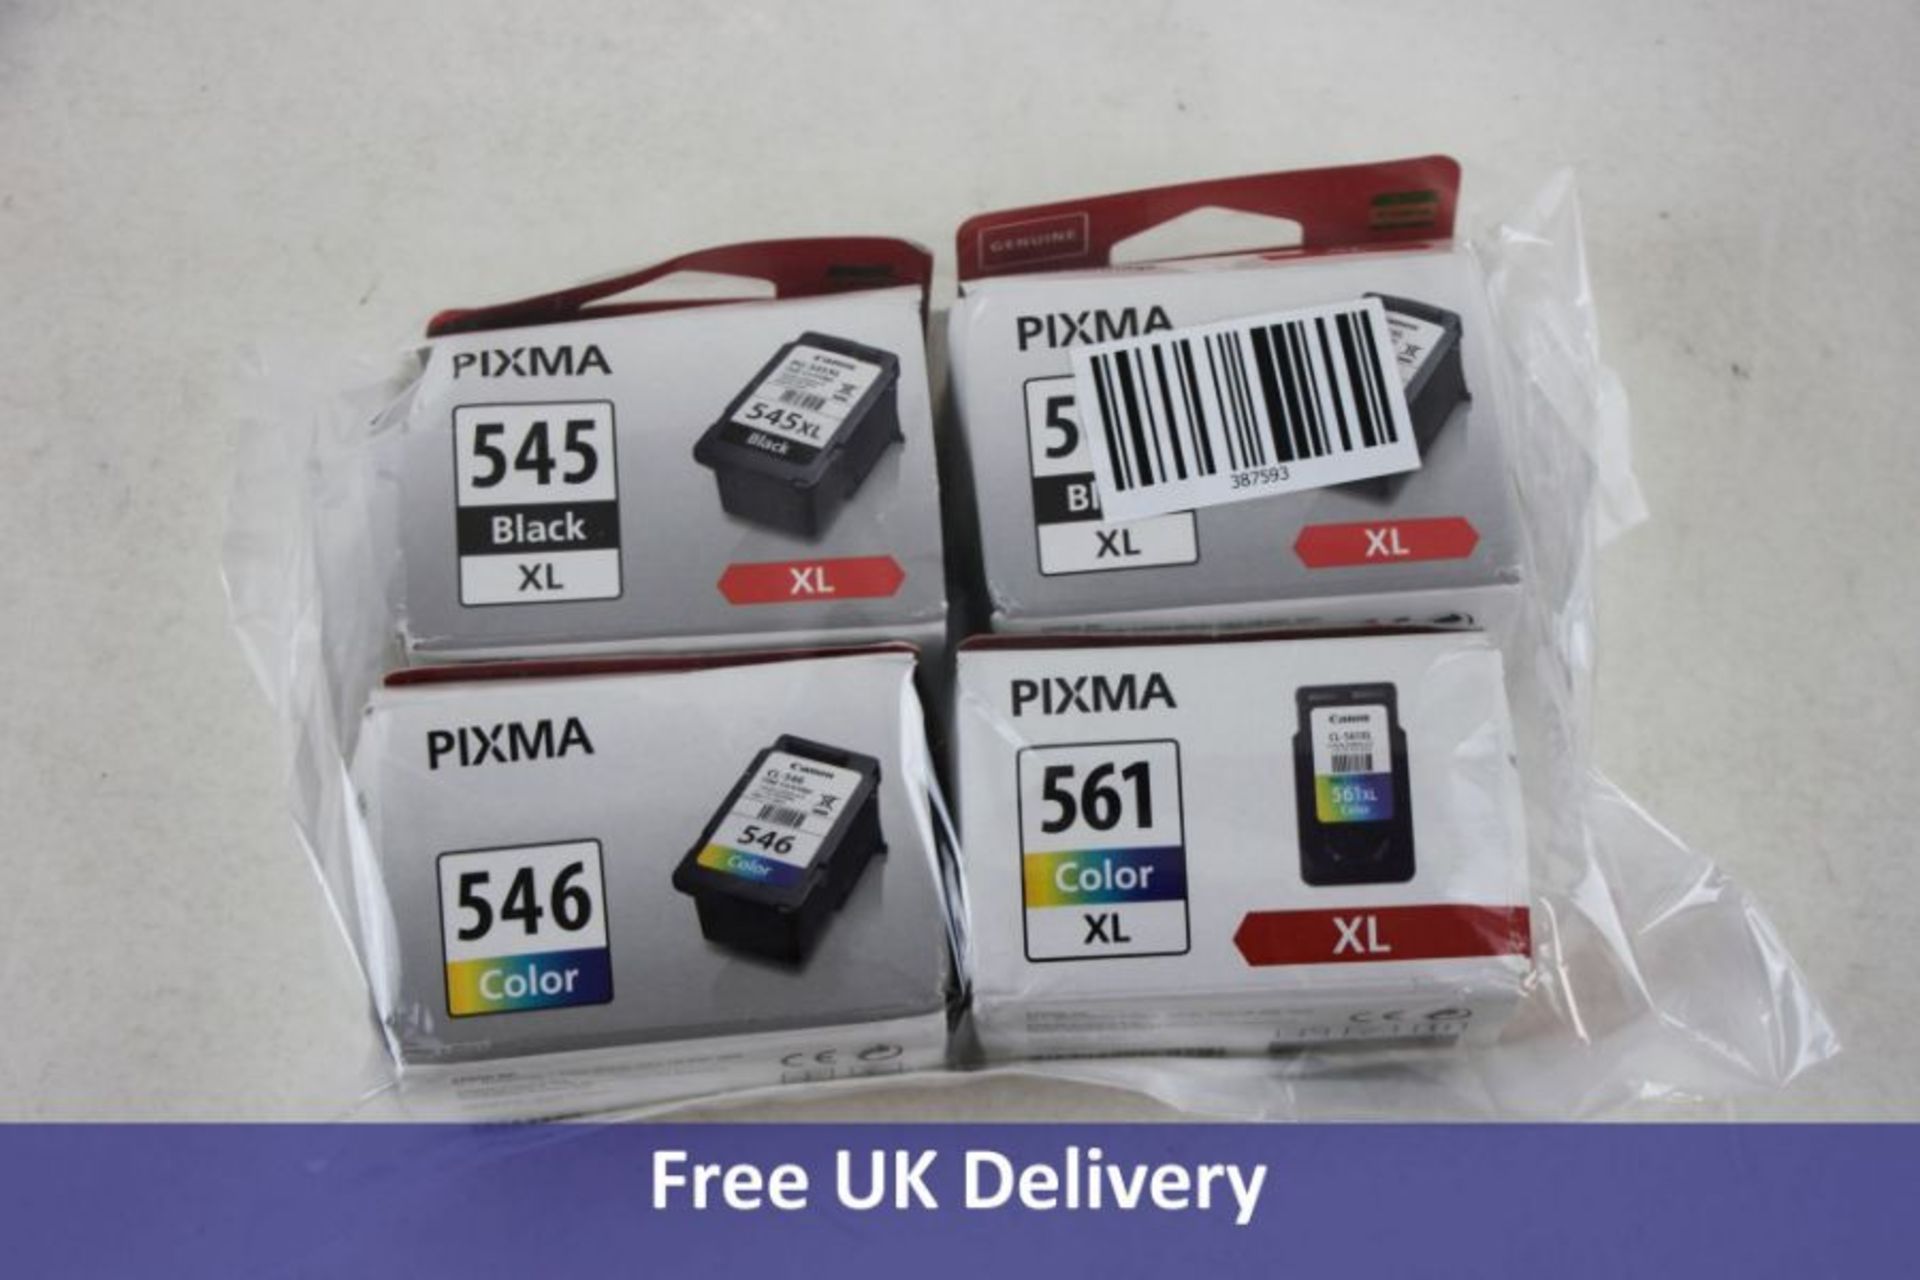 Four Canon Ink Cartridges to include 2x PG545XL, Black, 1x CL-561XL and 1x CL-546. Boxes damaged